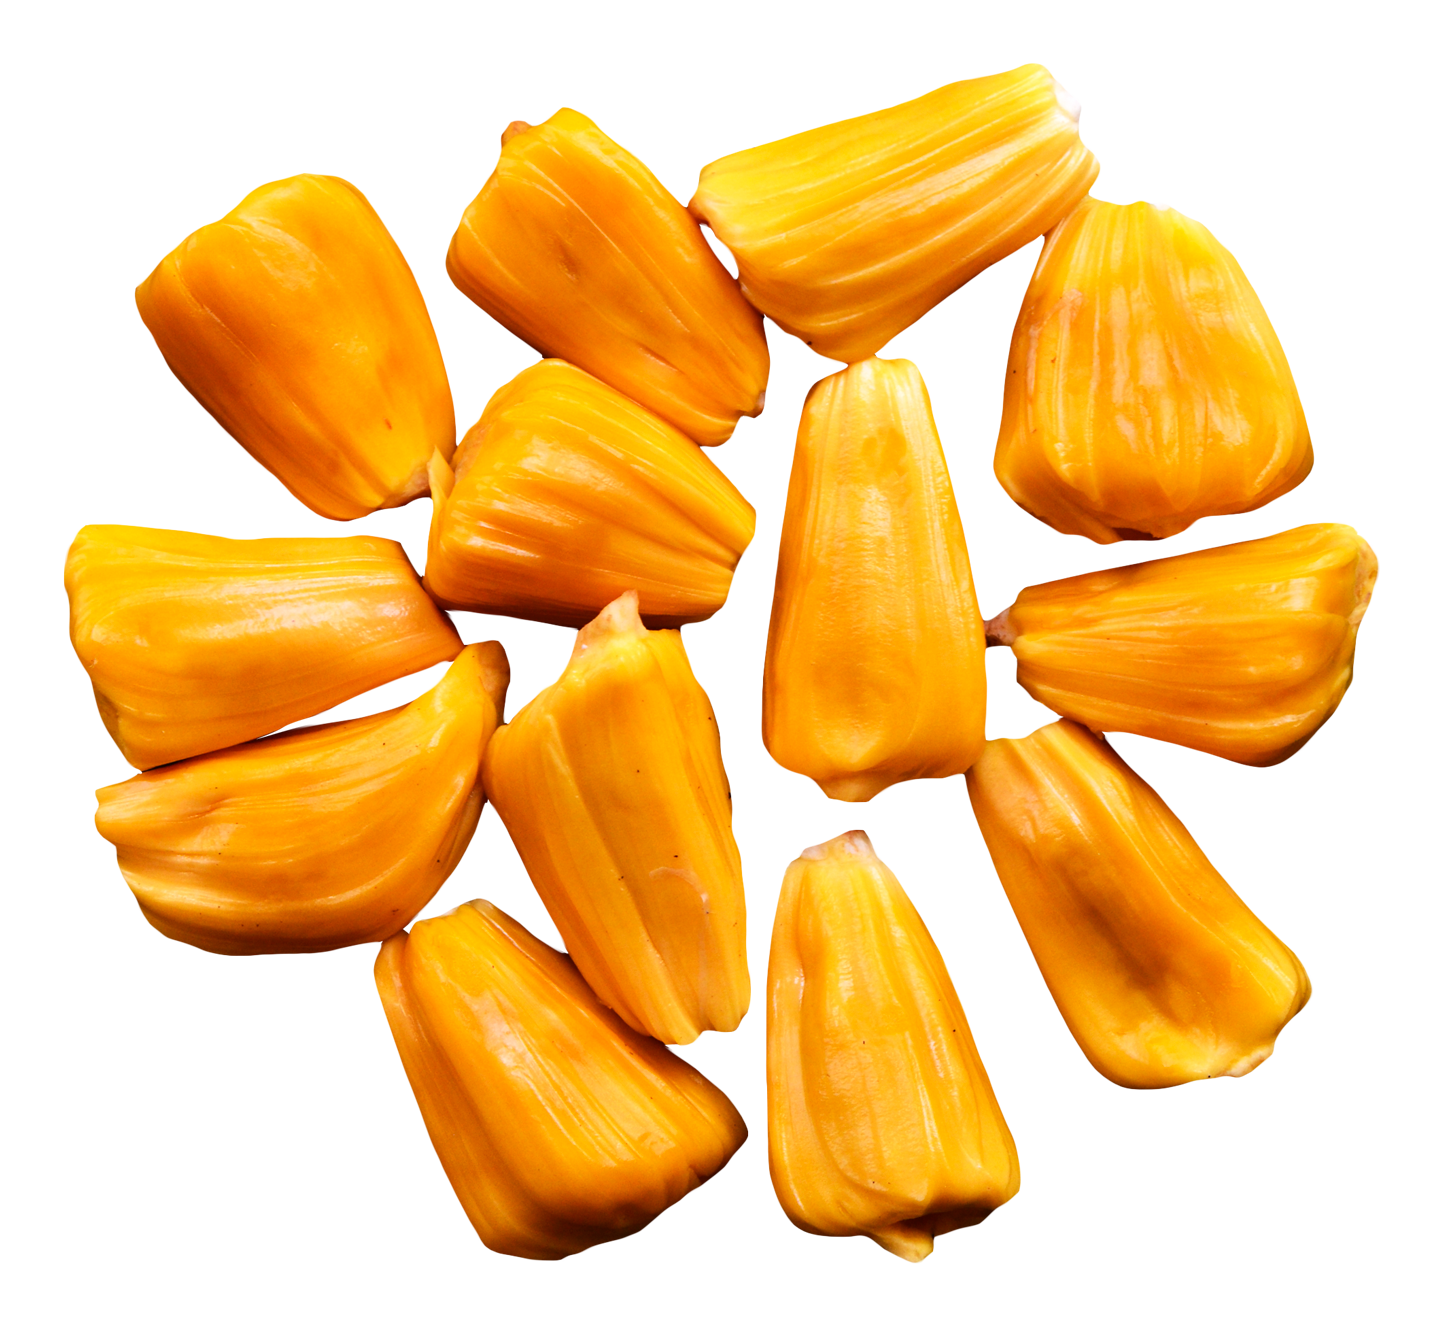 A Group Of Yellow Corn Kernels